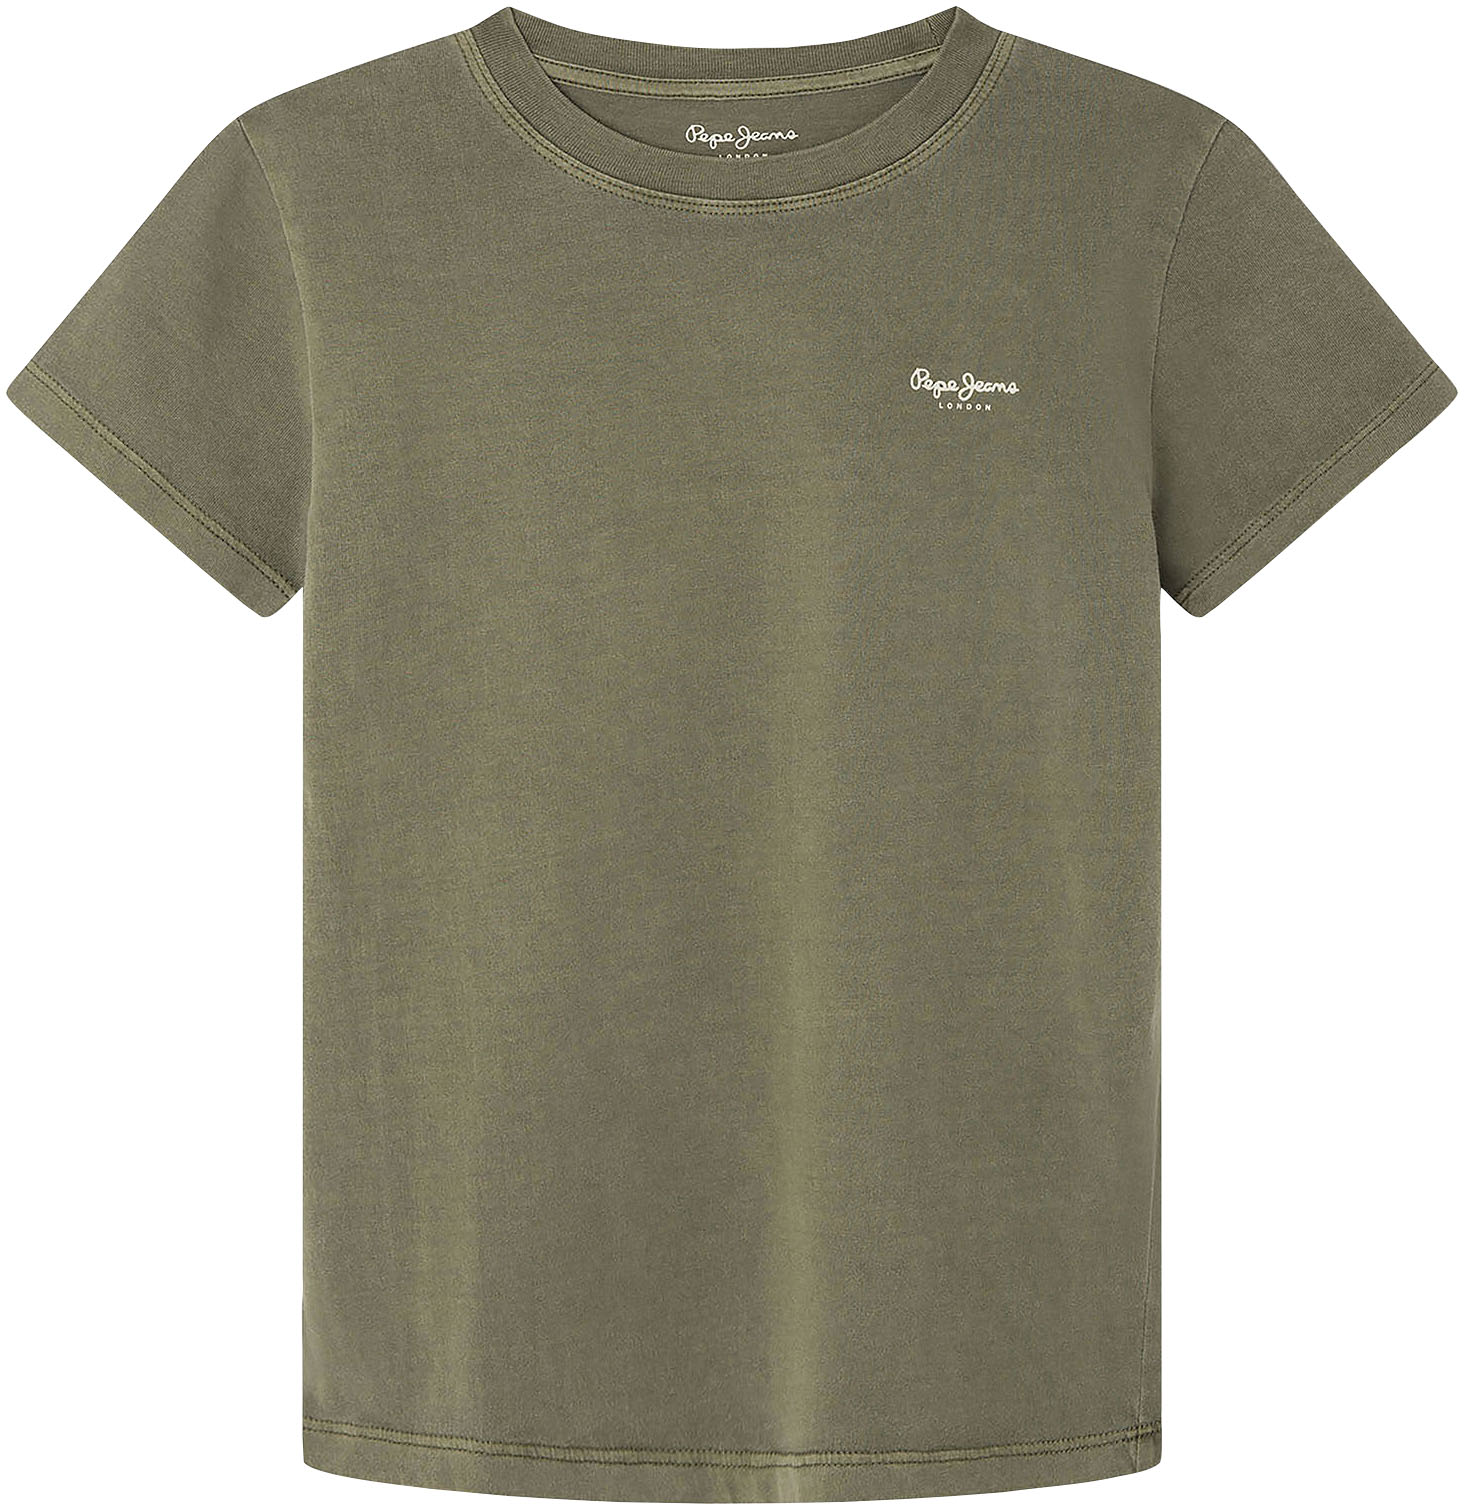 Pepe Jeans T-Shirt »JACCO« von Pepe Jeans